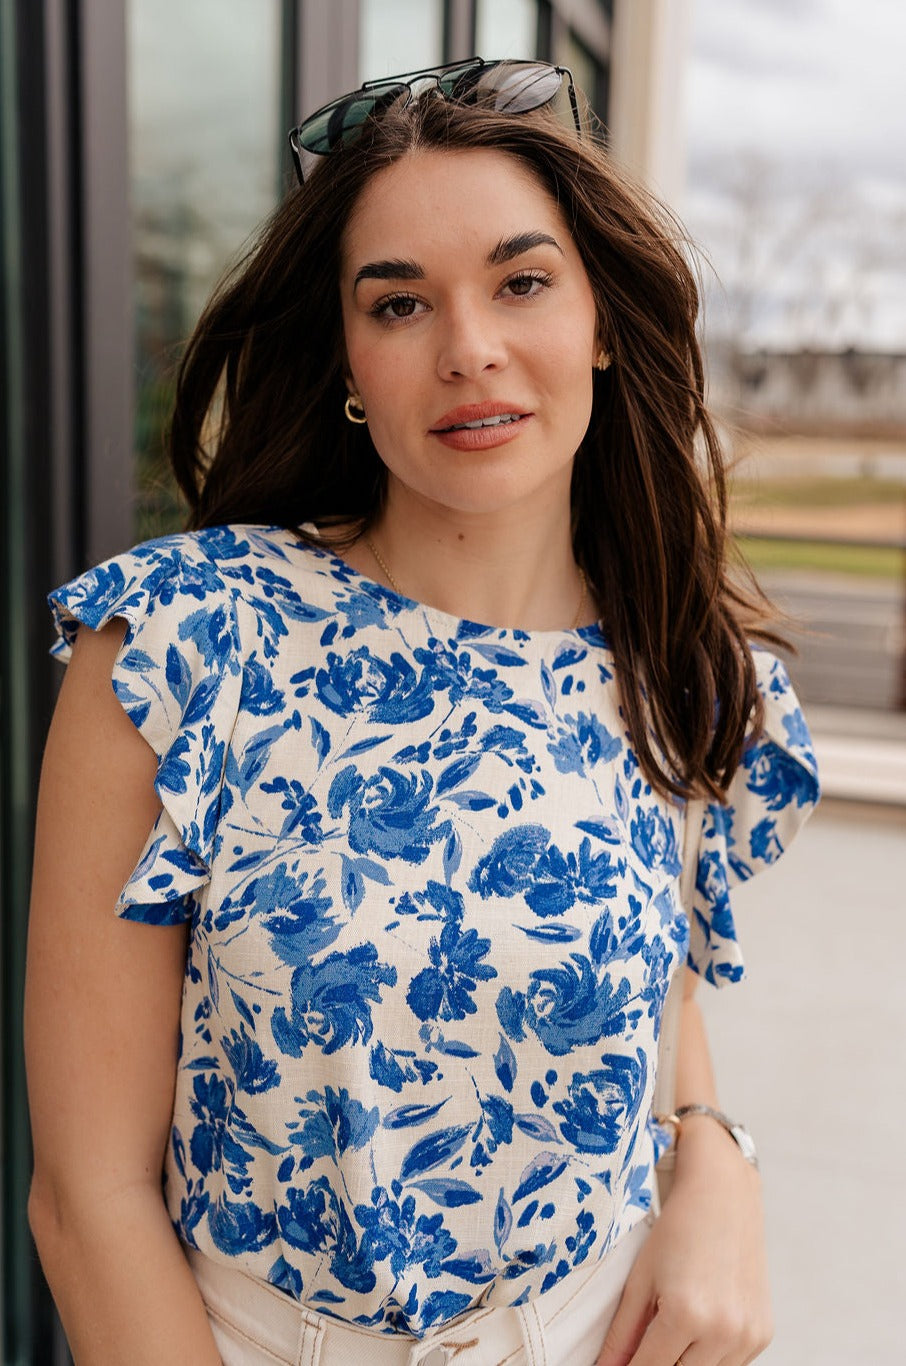 Close up view of model wearing the Carmen Blue & Cream Floral Top which features blue and cream knit fabric, floral pattern, round neckline, ruffle short sleeves and keyhole back with button closure.